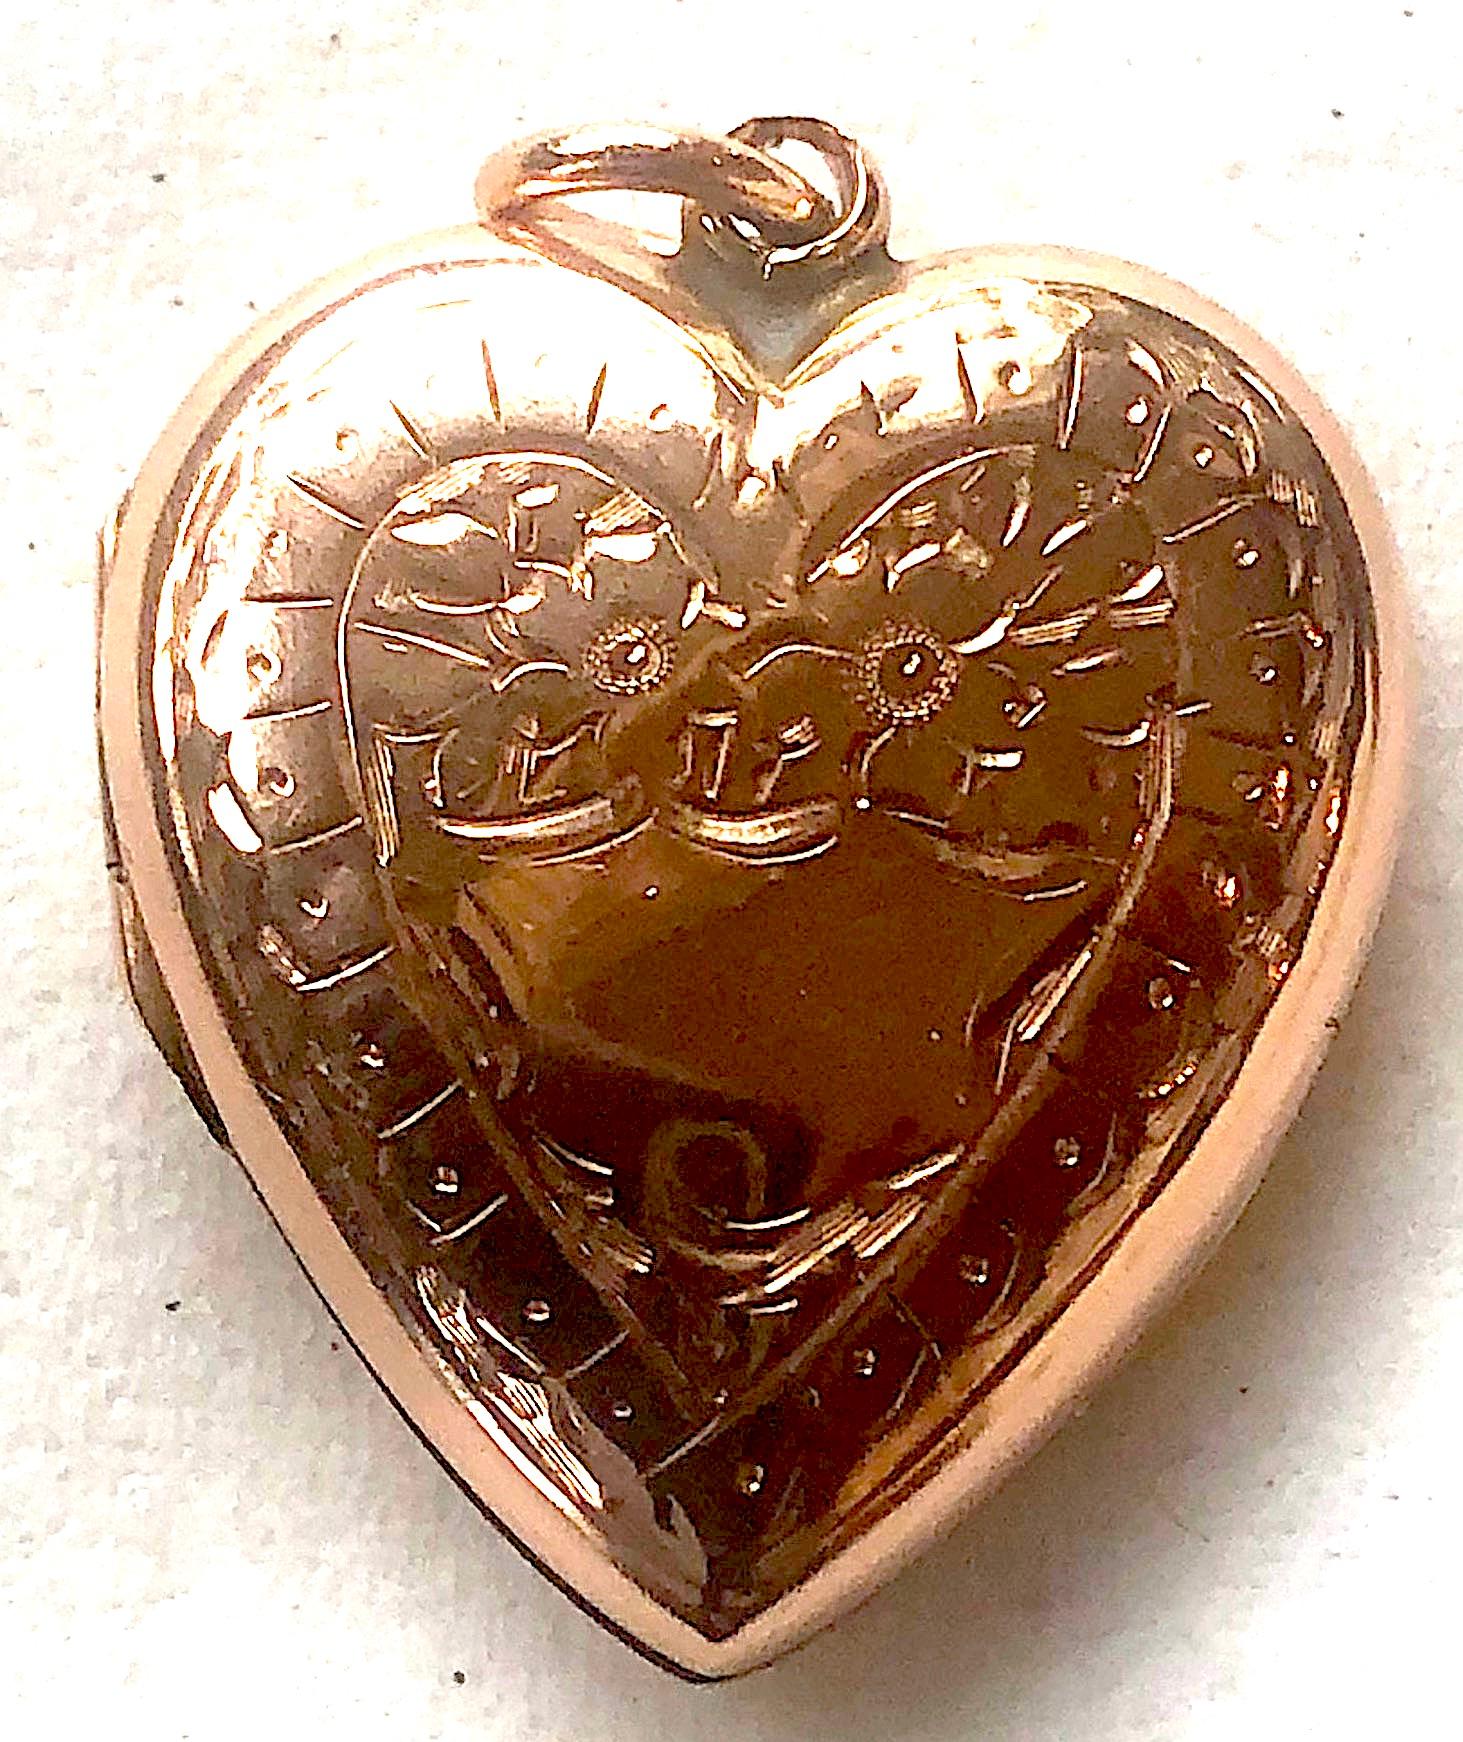 Antique 9K locket in the shape of a heart, with the original daguerreotype photos inside. Both sides are of 9K  as is the attached gold bale. There is a ring attached to the bale to hang the locket from a chain. On the one side has a scene of what